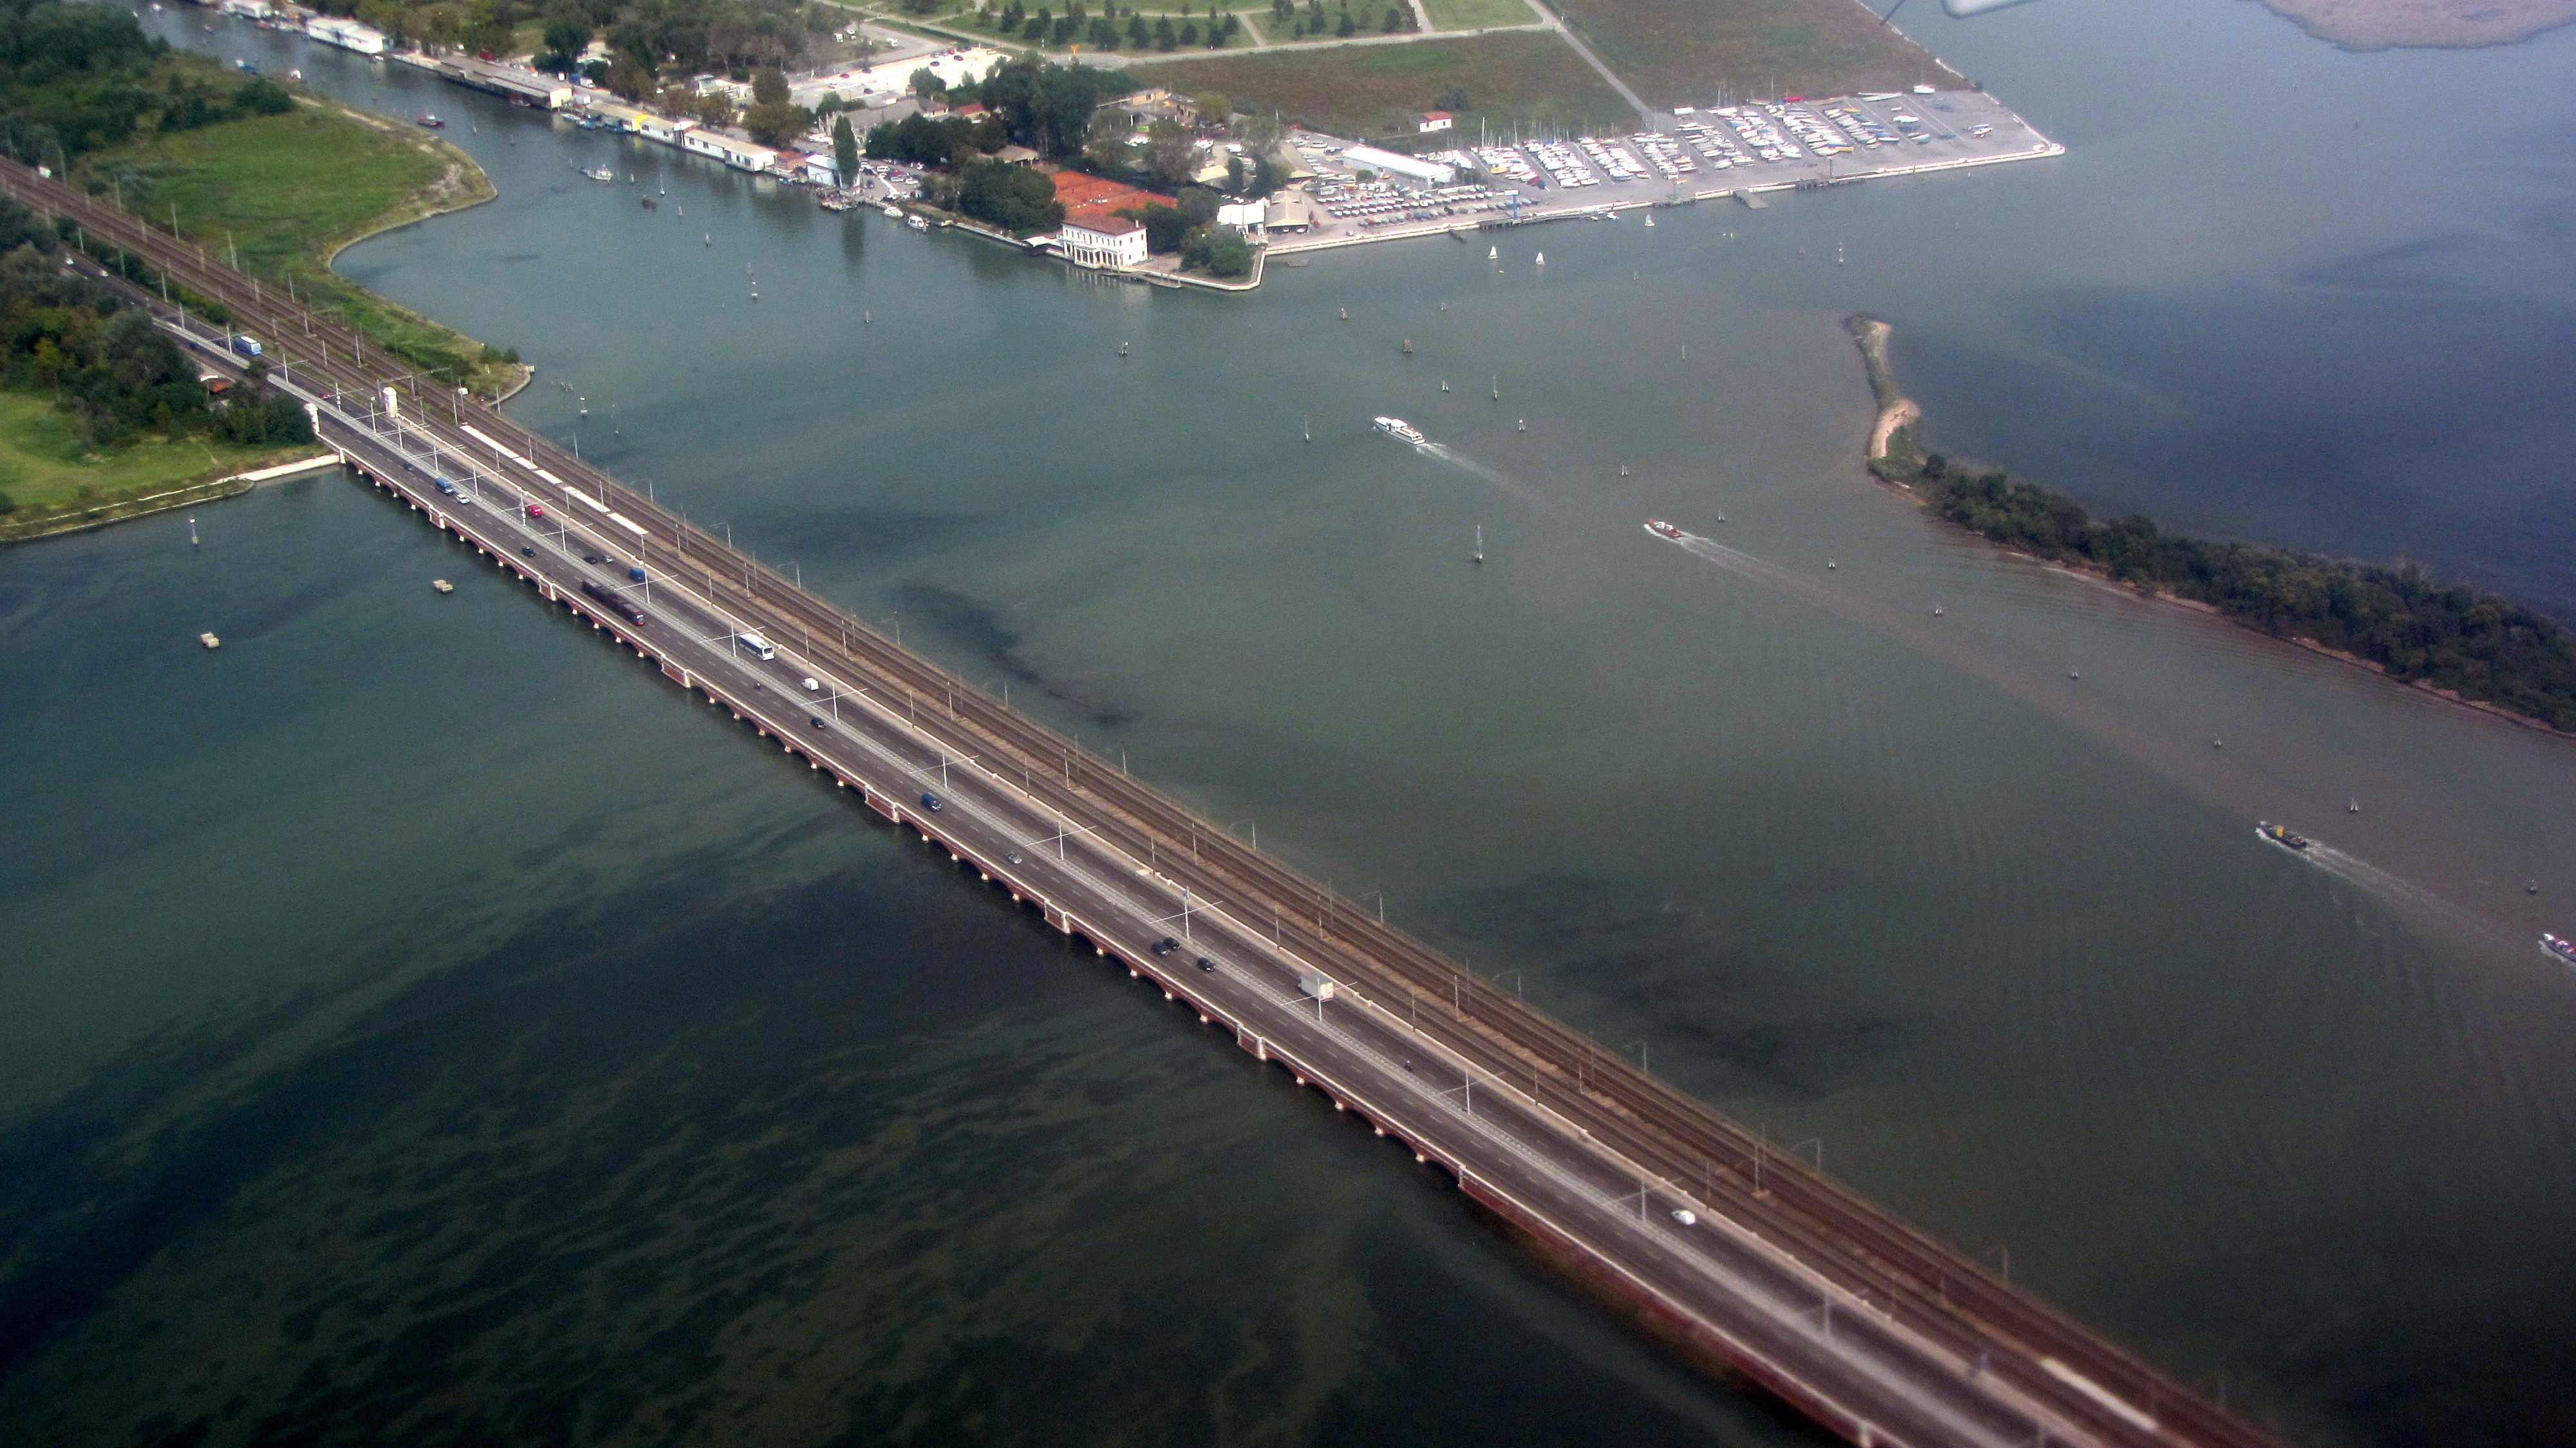 The road and railway bridge to the city of Venice